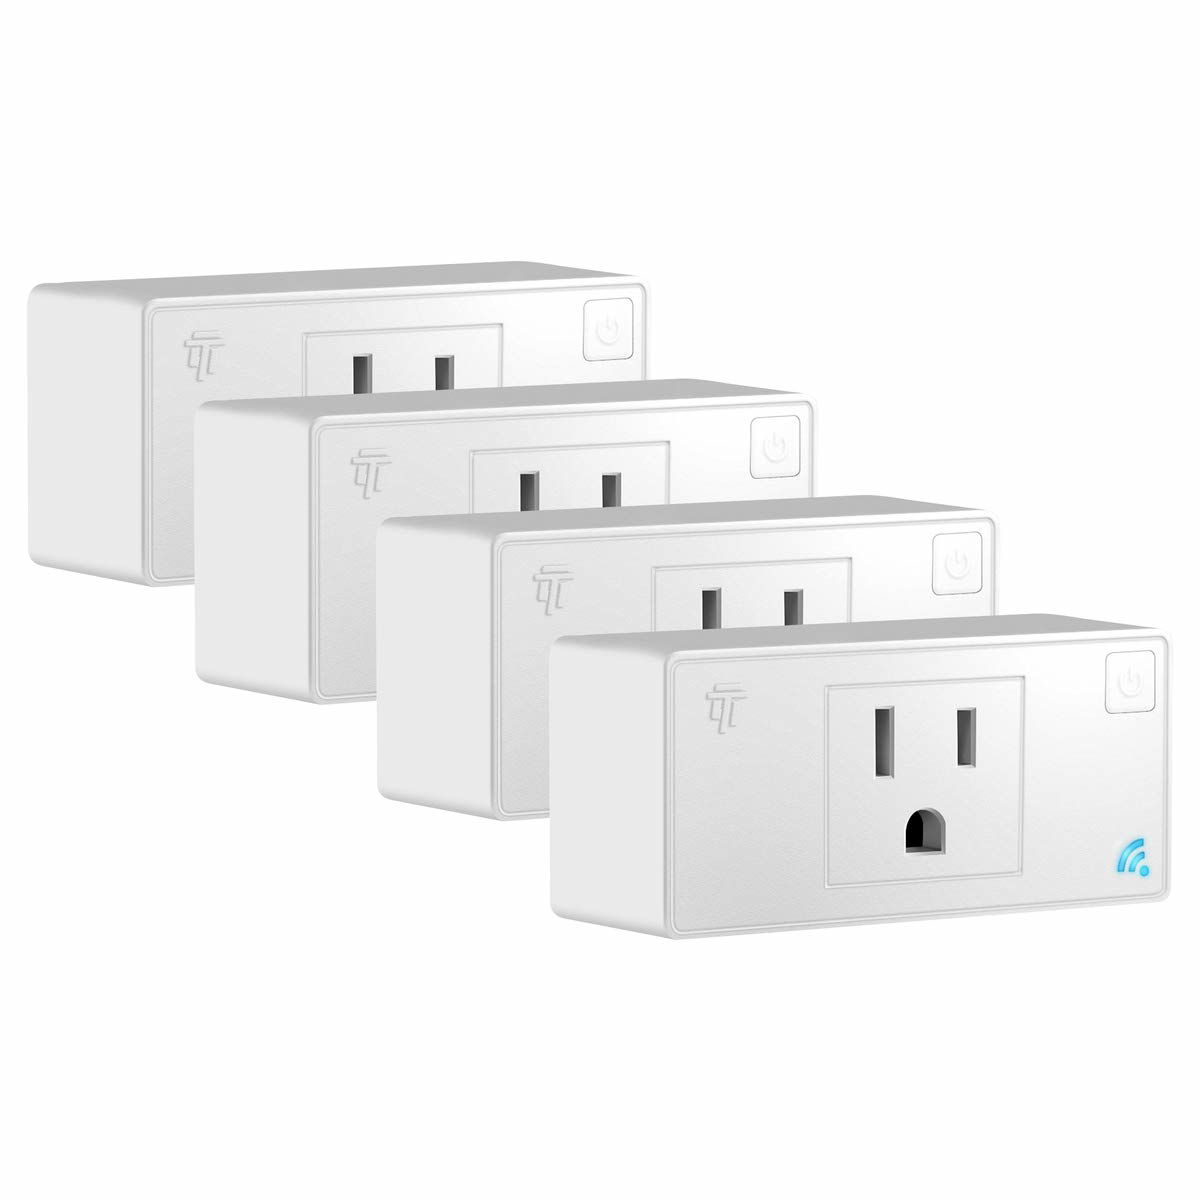 TOPGREENER Smart Mini Wi-Fi Plug with Energy Monitoring, Mini Smart Outlet, Control Lights and Appliances from Anywhere, No Hub Required, Works with Alexa and Google Assistant, TGWF115PQM, 4-Pack